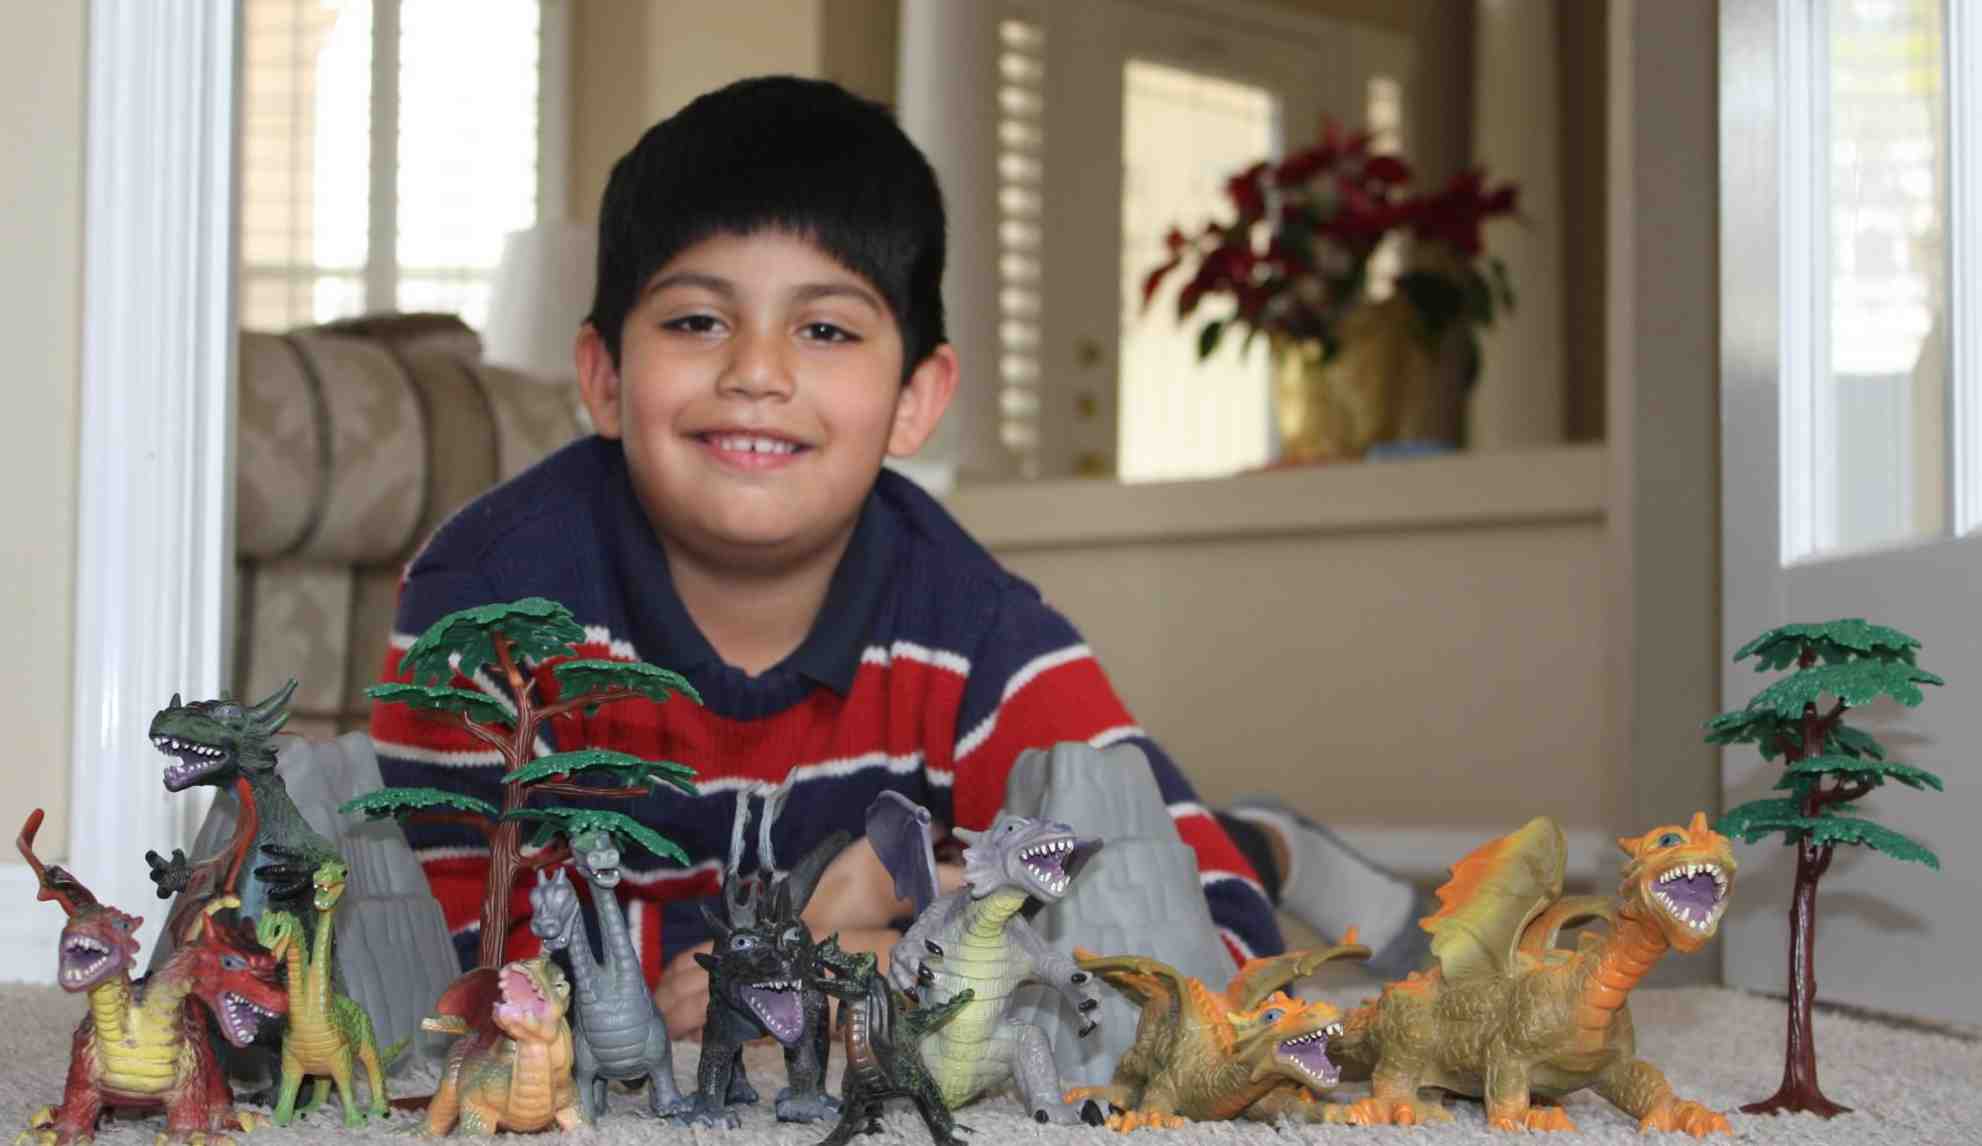 Ryan With His Toy Dinosaurs